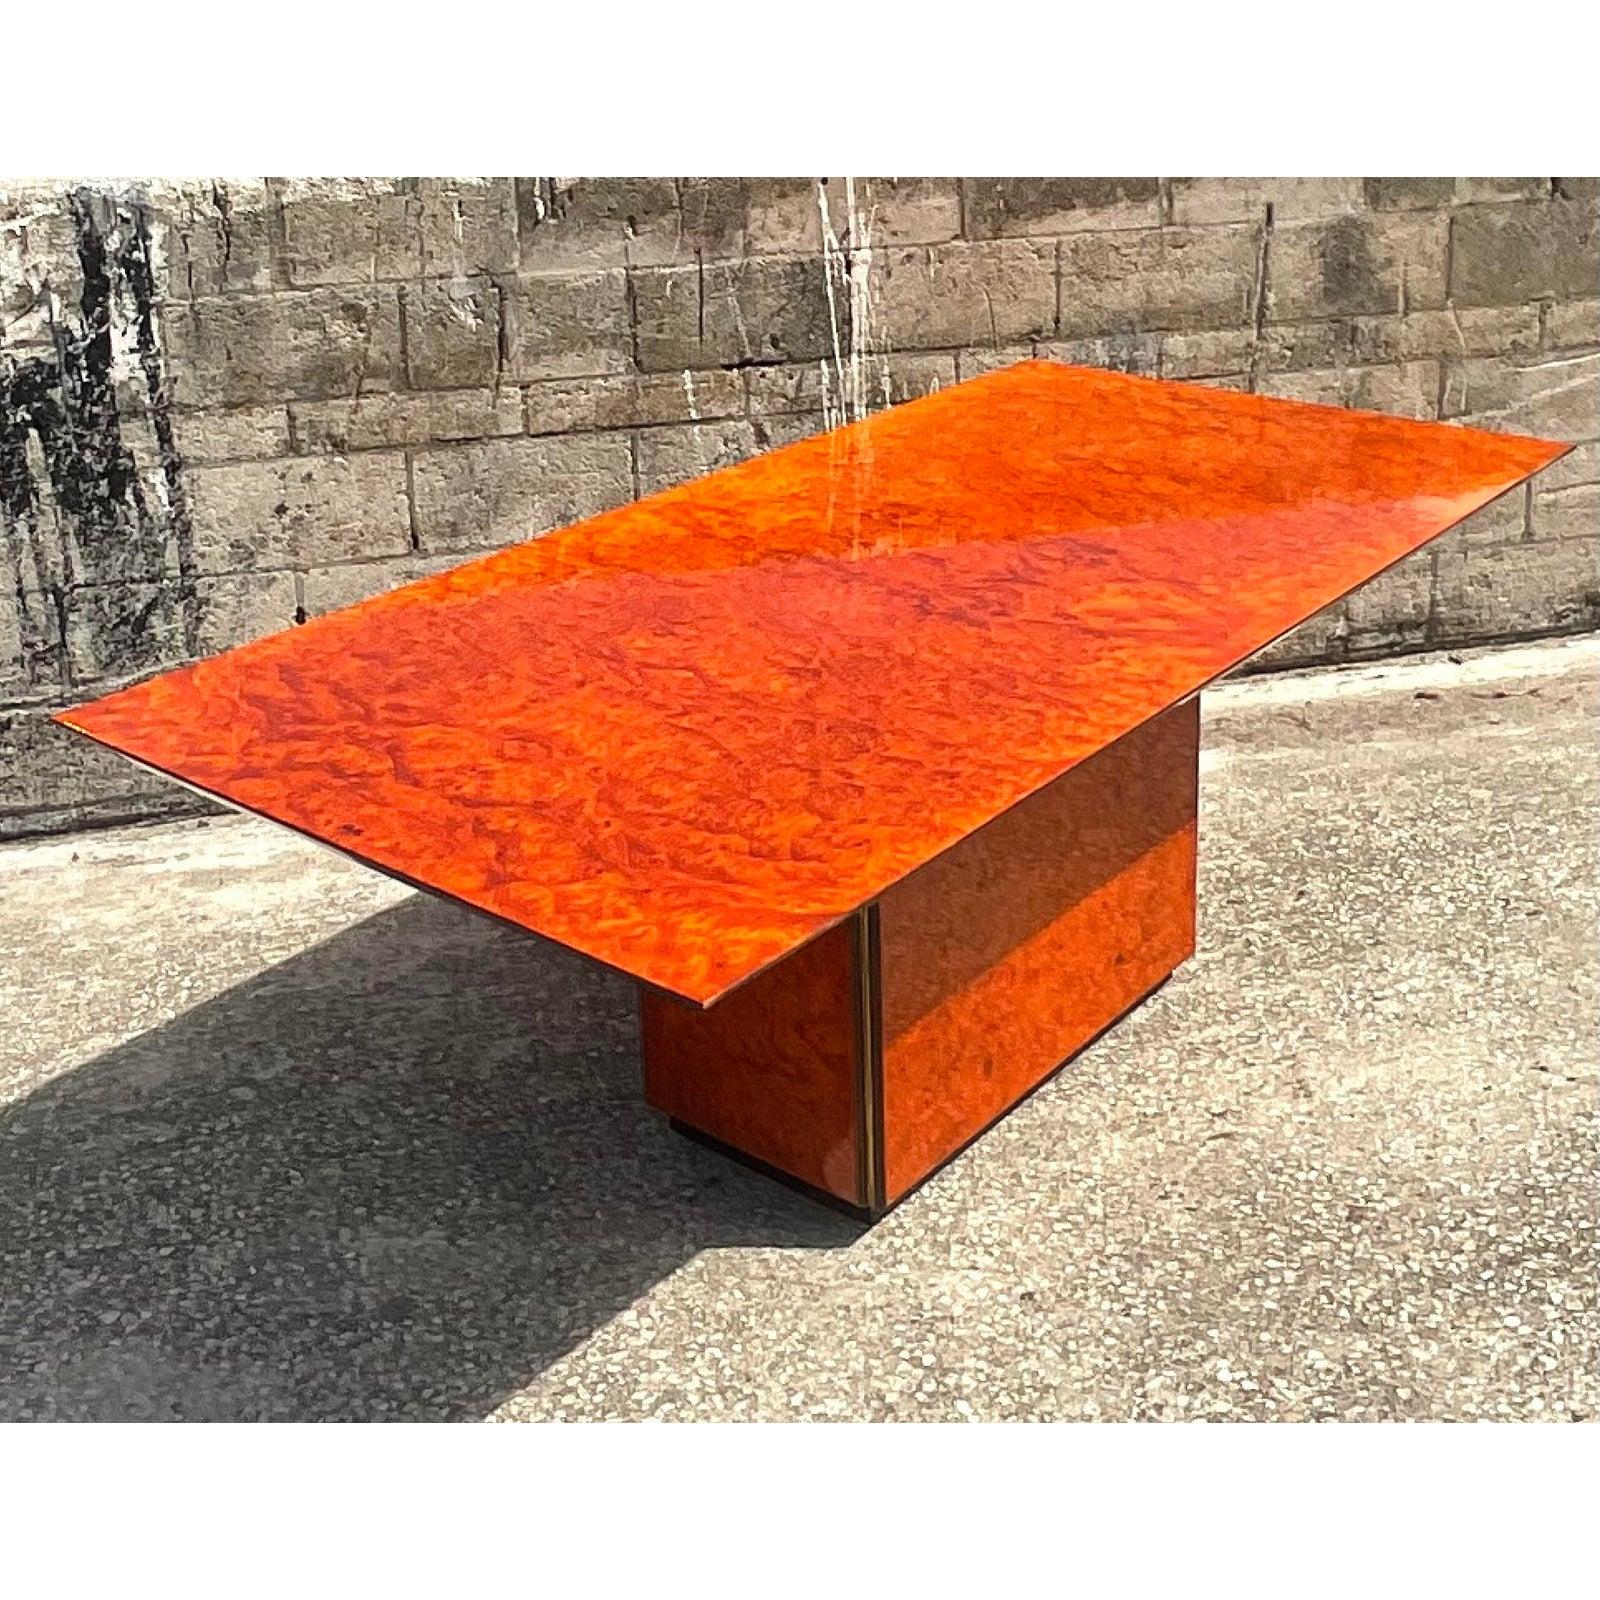 Fantastic vintage Lacquered Burl wood dining table. Made by the iconic Roche Bobois group. Incredible wood grain detail with a stacked pedestal. Matching credenza also available. Acquired from a Palm Beach estate.